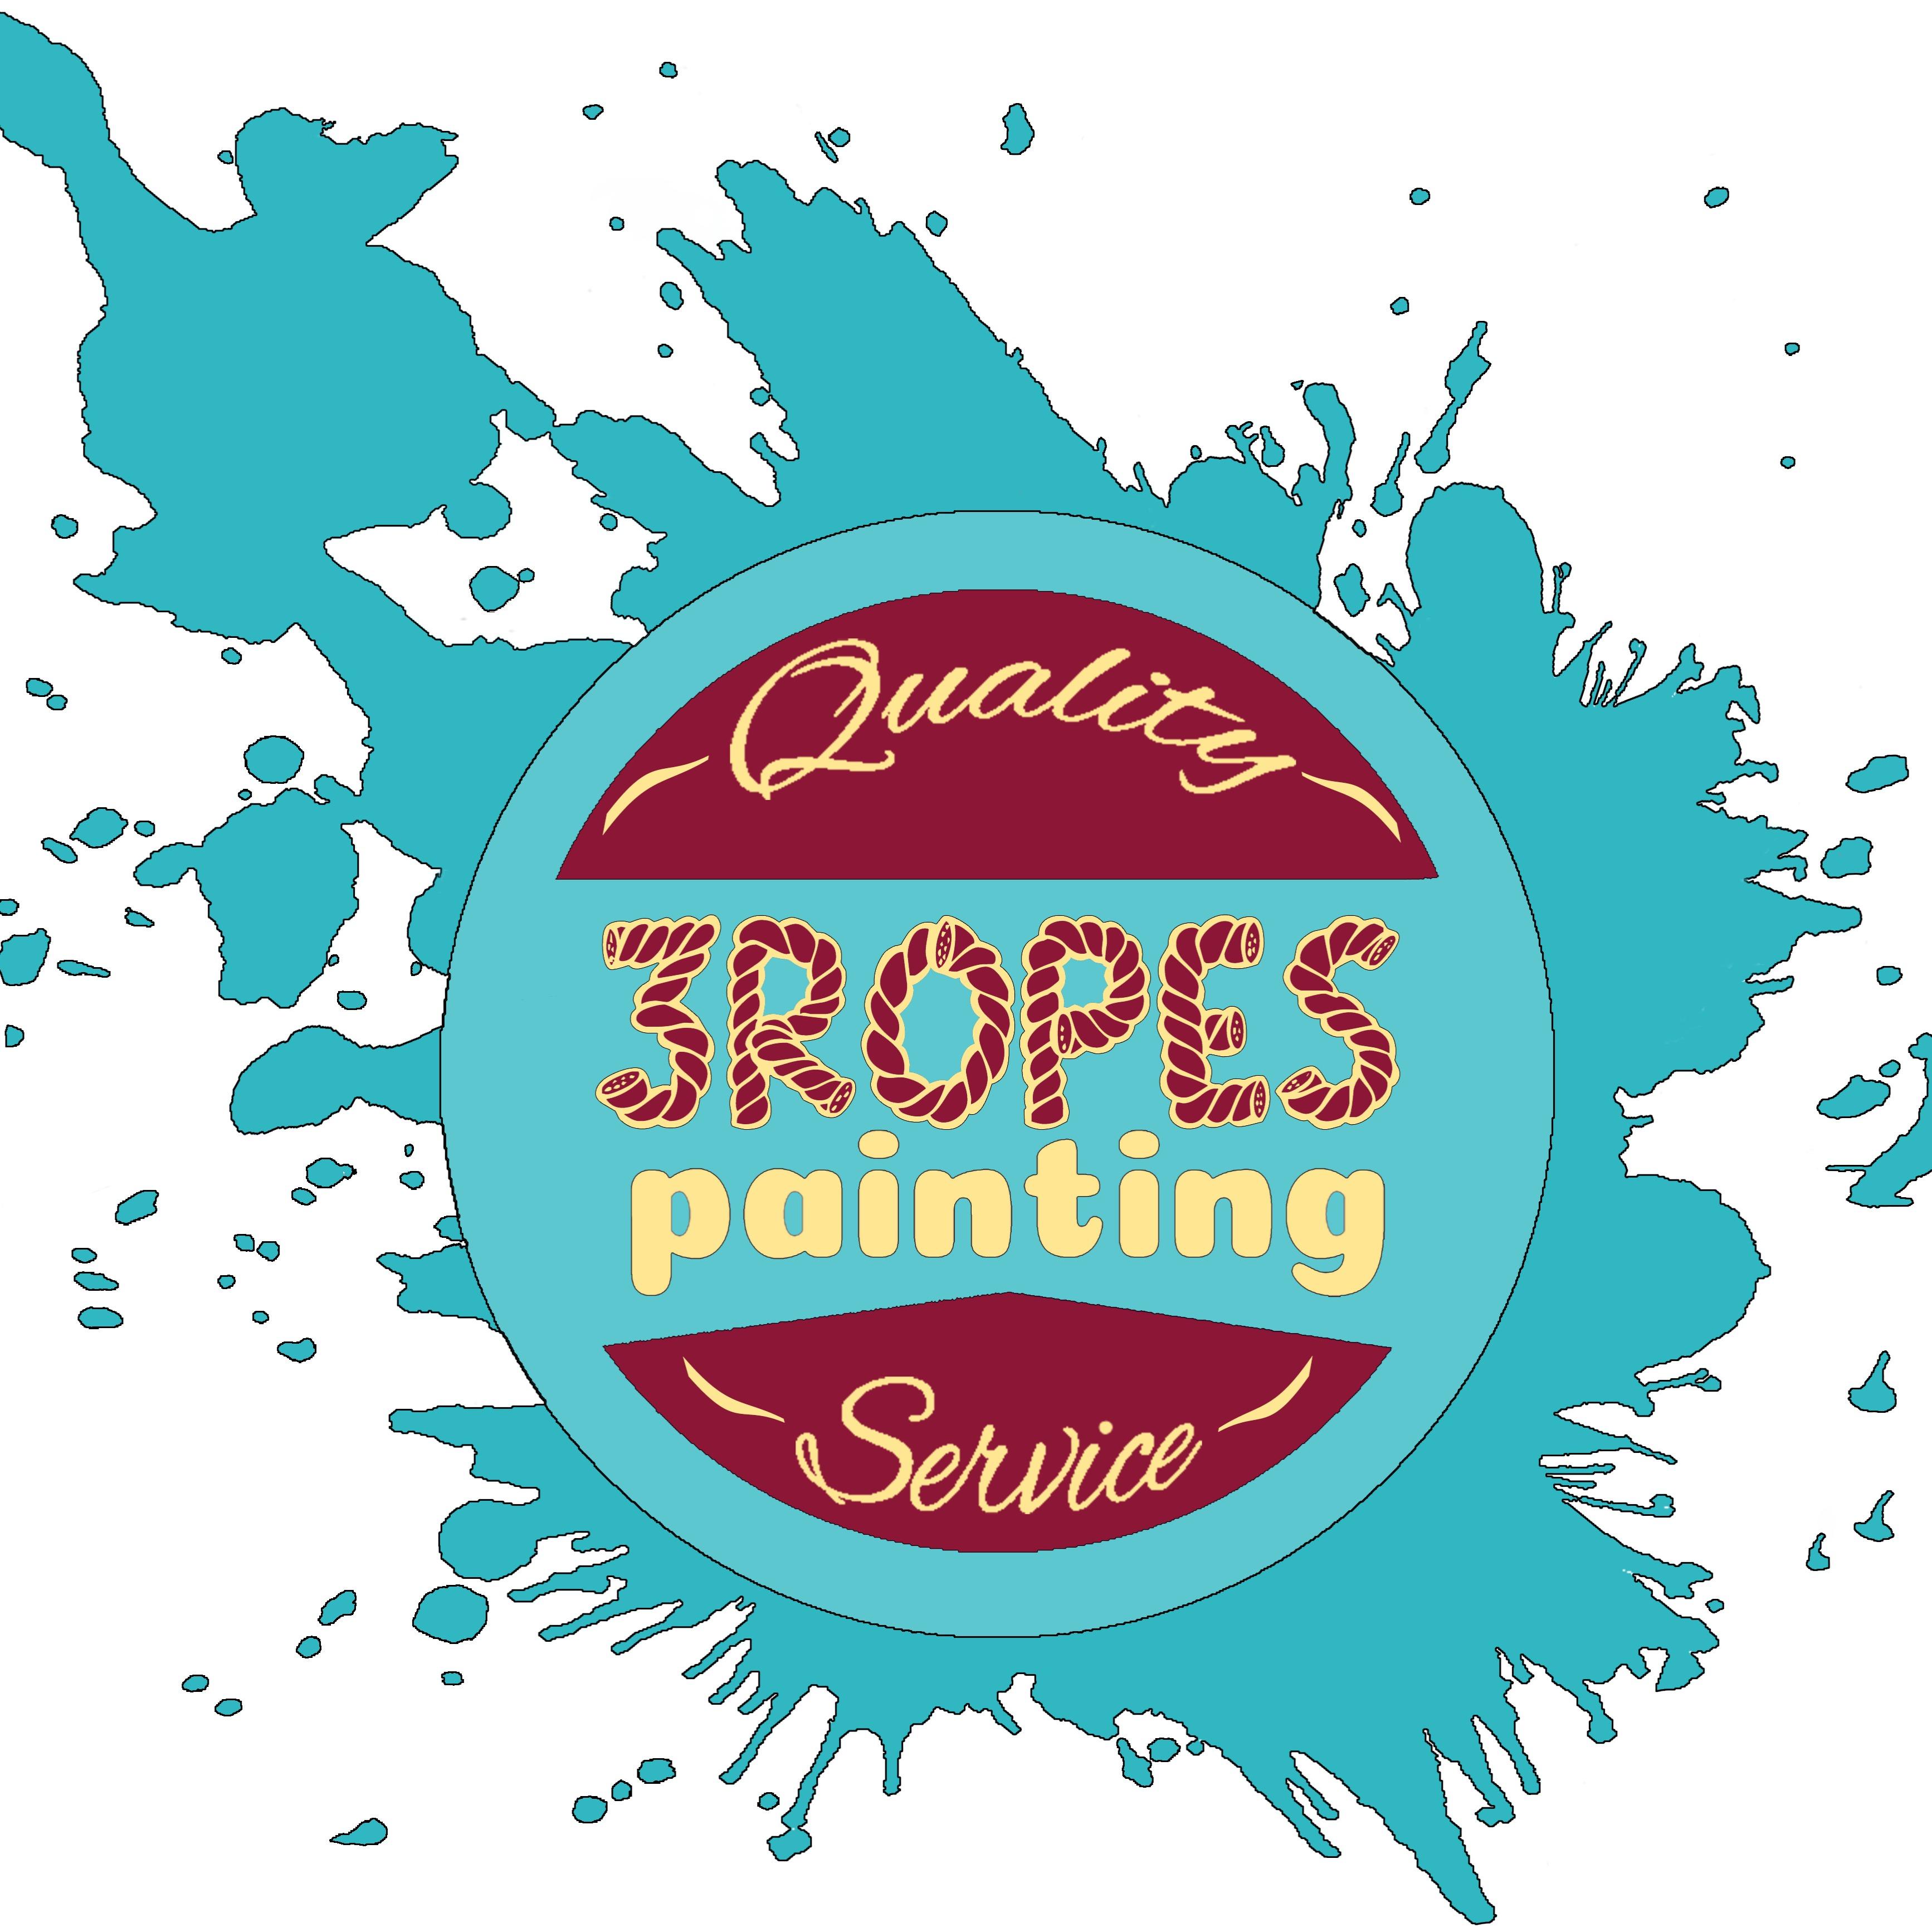 3 Ropes Painting - St. George, UT - (435)277-0834 | ShowMeLocal.com